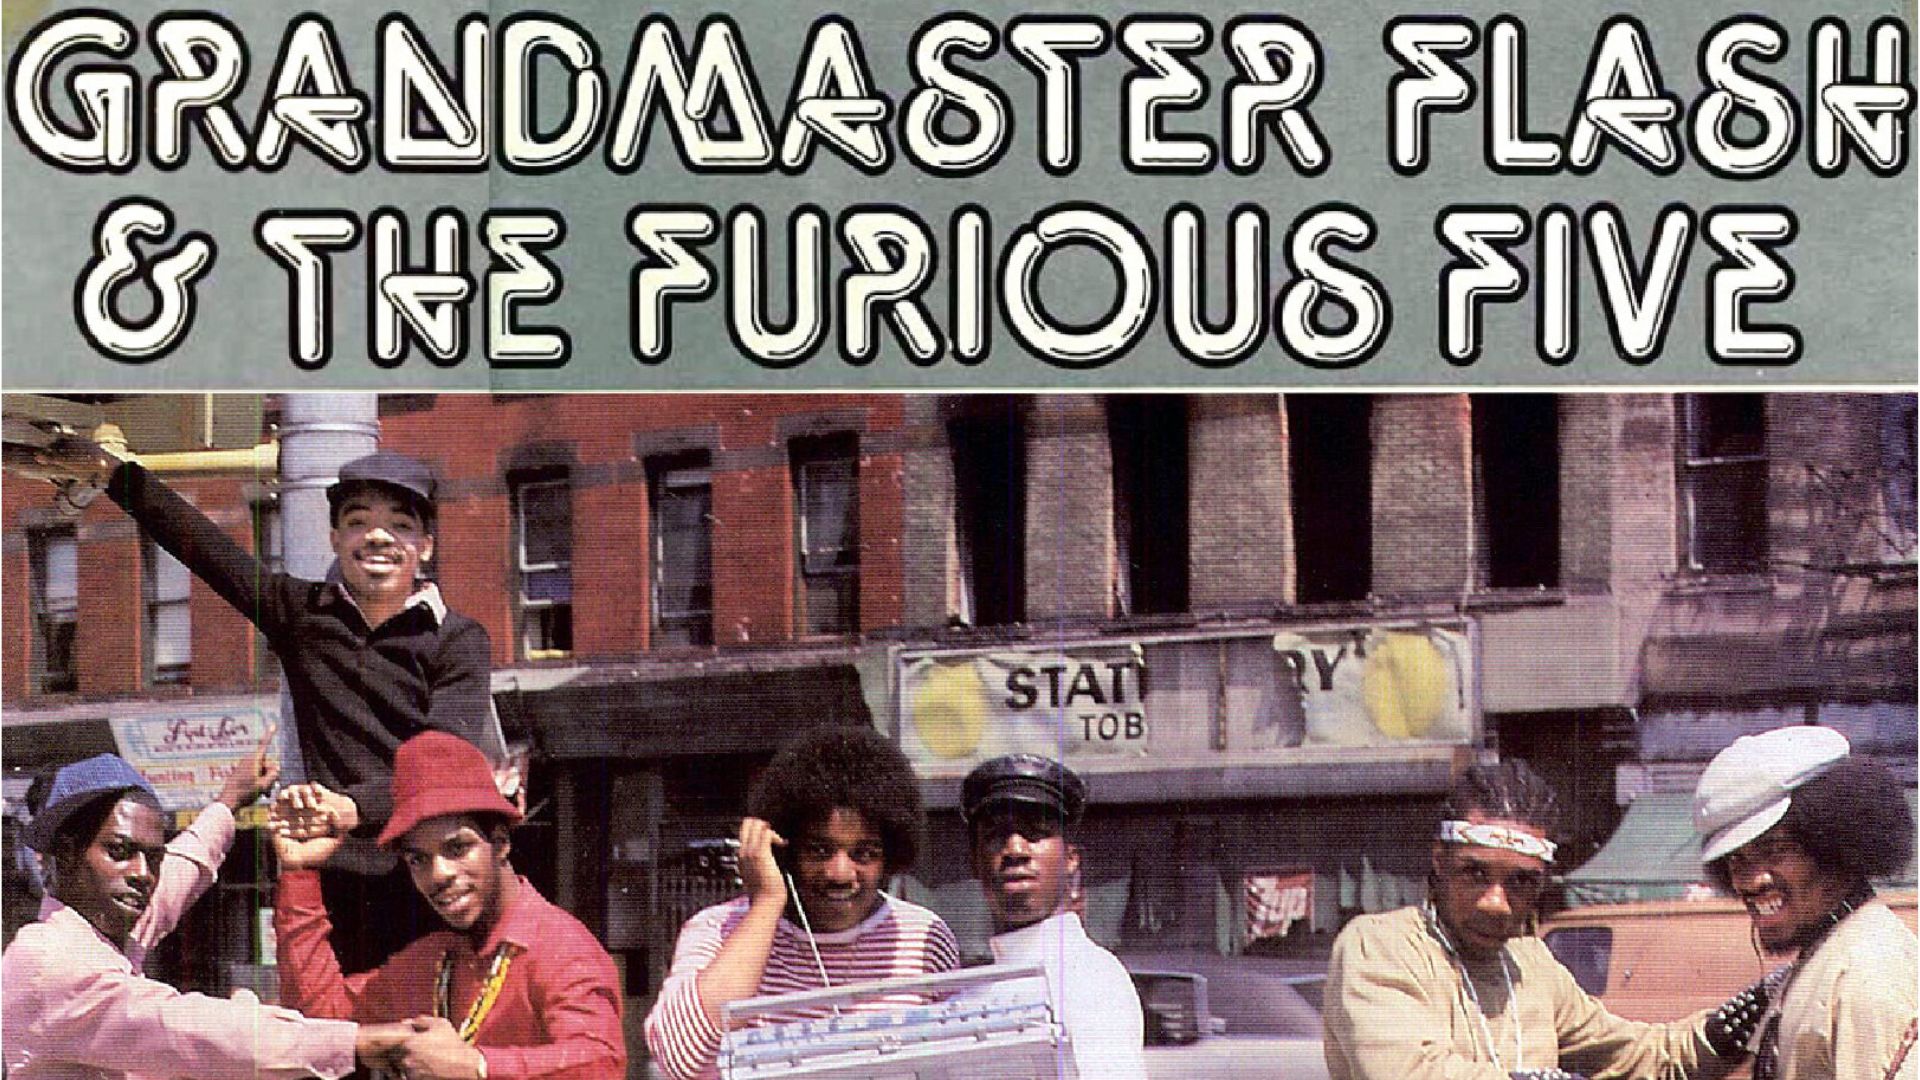 Grandmaster Flash & The Furious Five Drop 'The Message